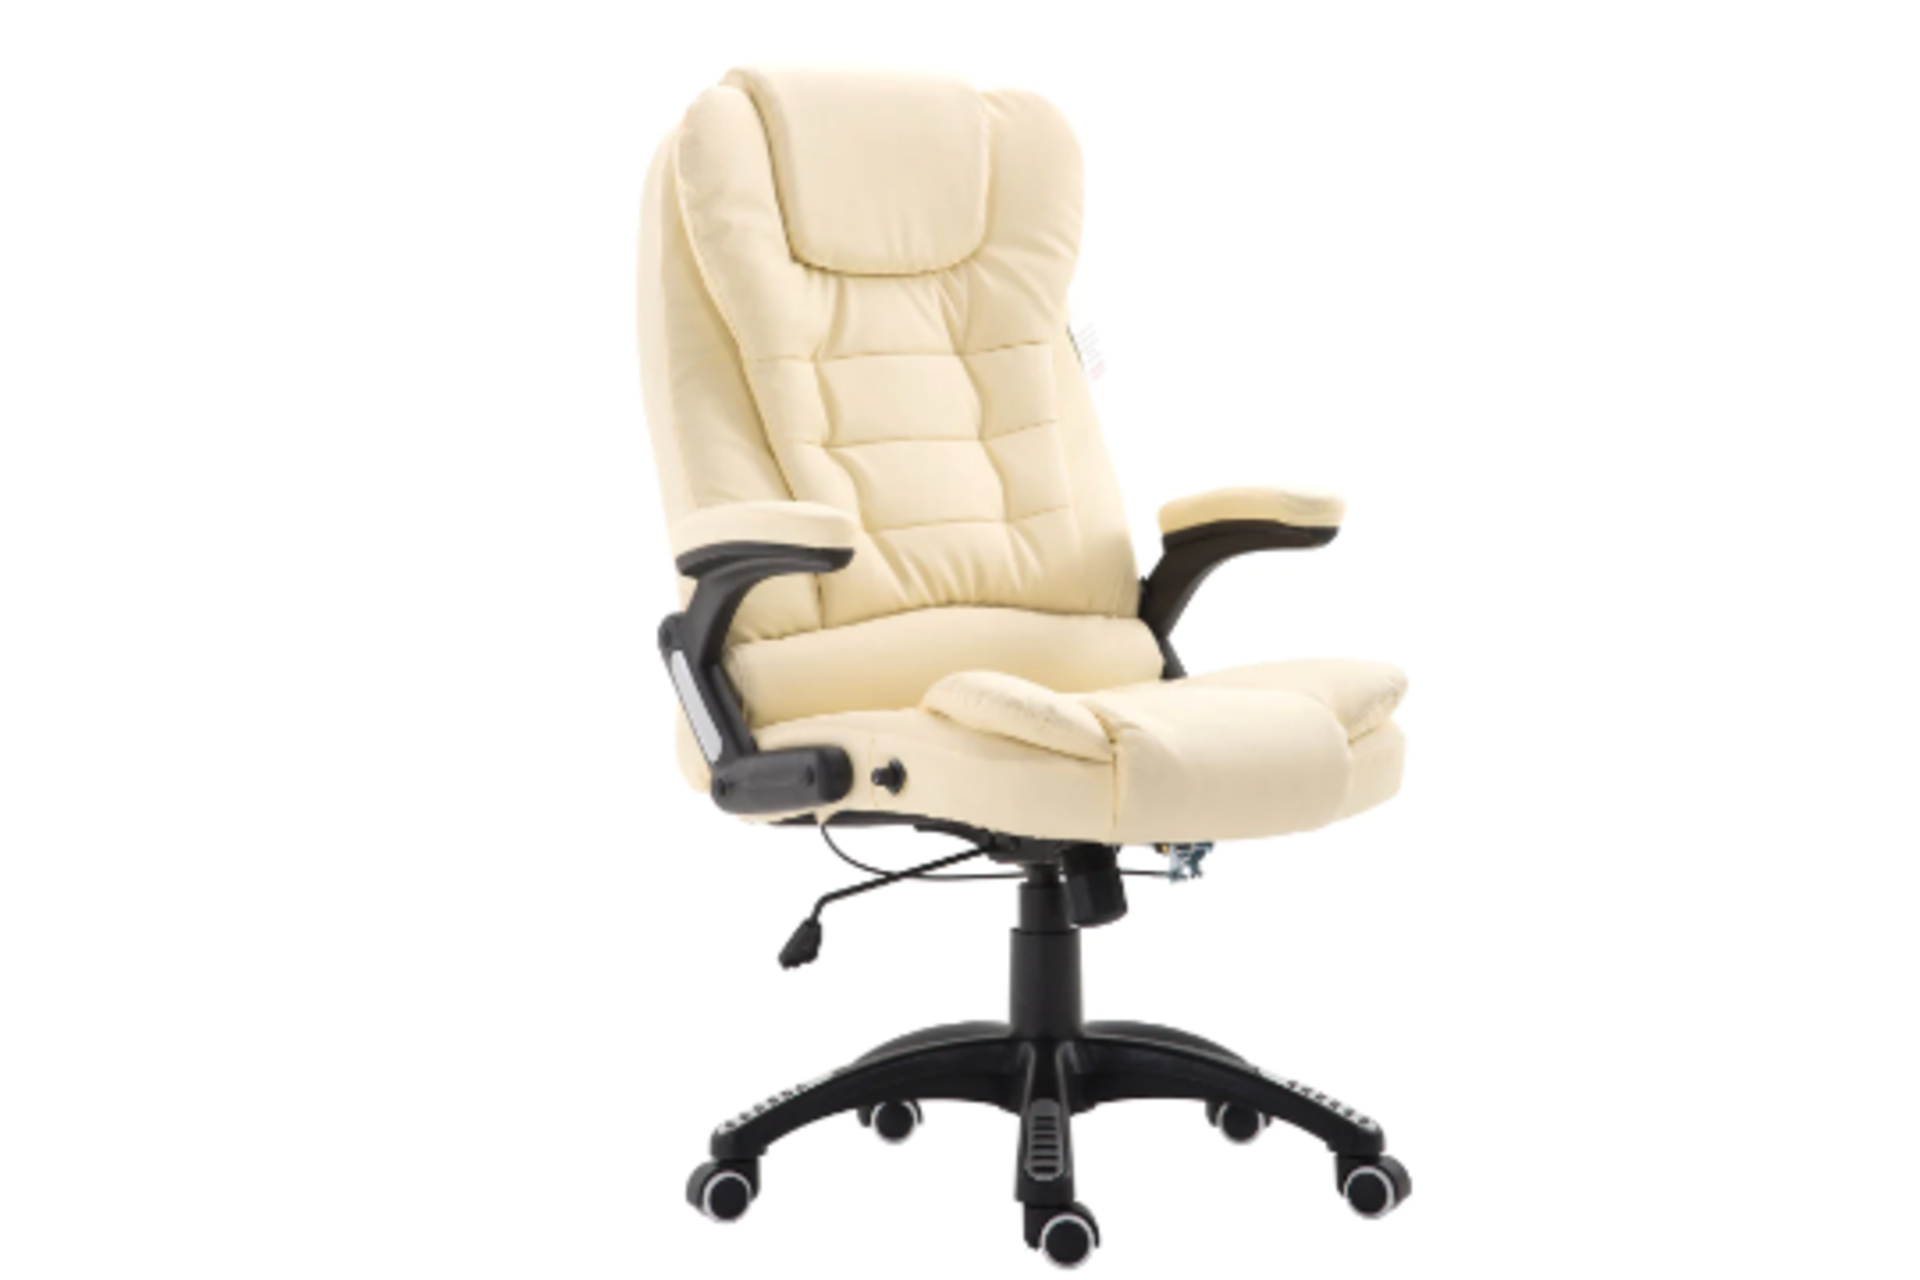 Executive Recline High Back Extra Padded Office Chair, MO17 Cream. RRP £189.99. - SR4. High back